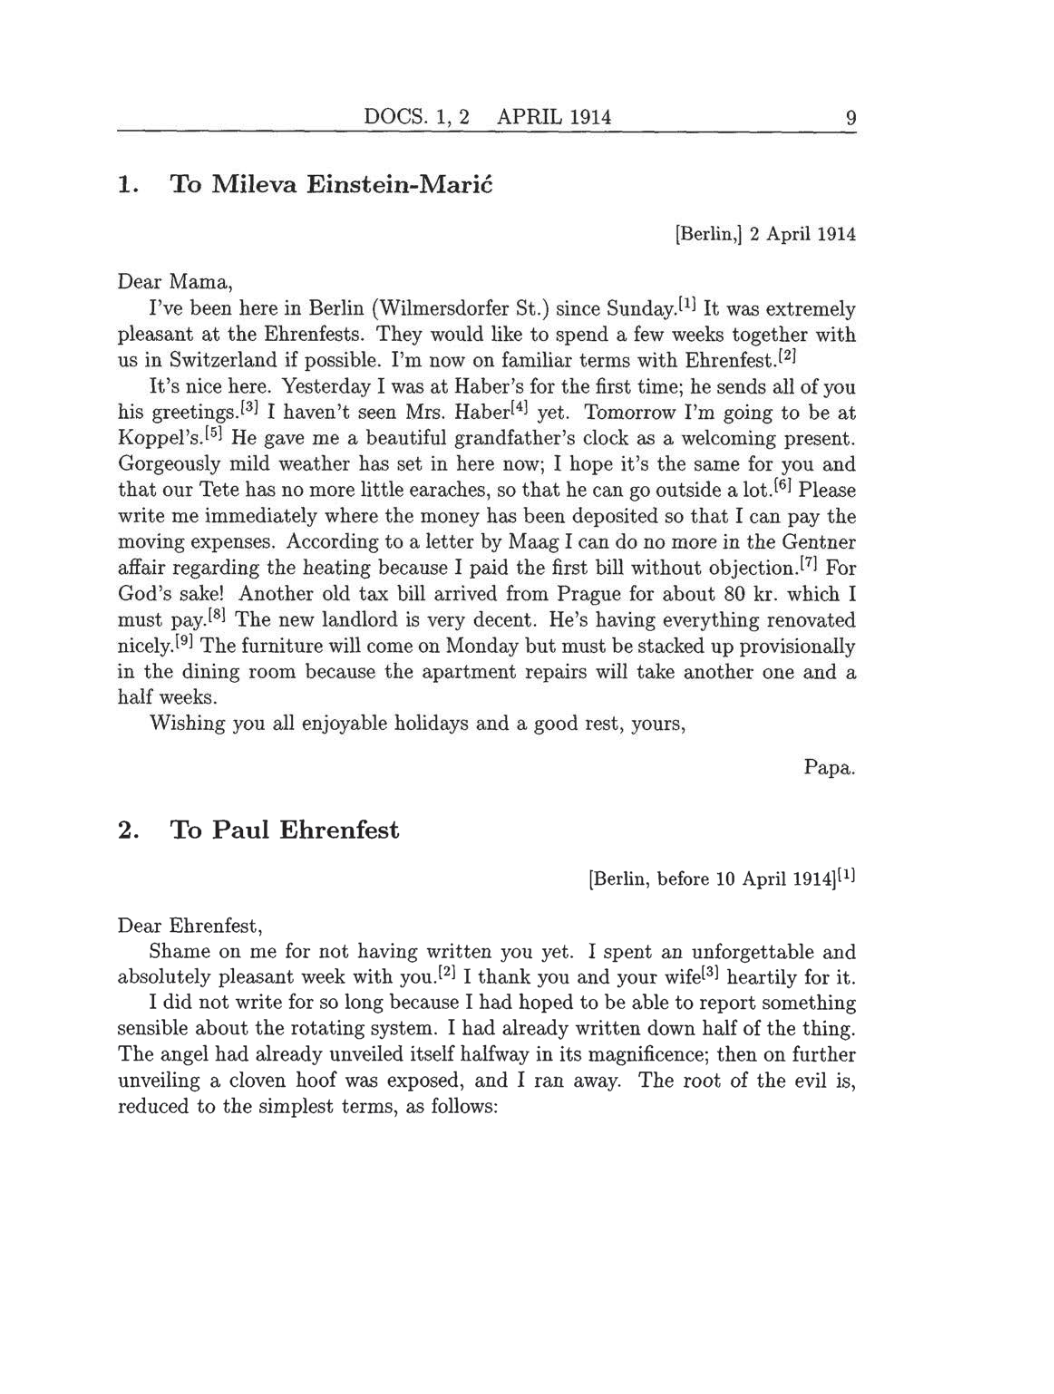 Volume 8: The Berlin Years: Correspondence, 1914-1918 (English translation supplement) page 9